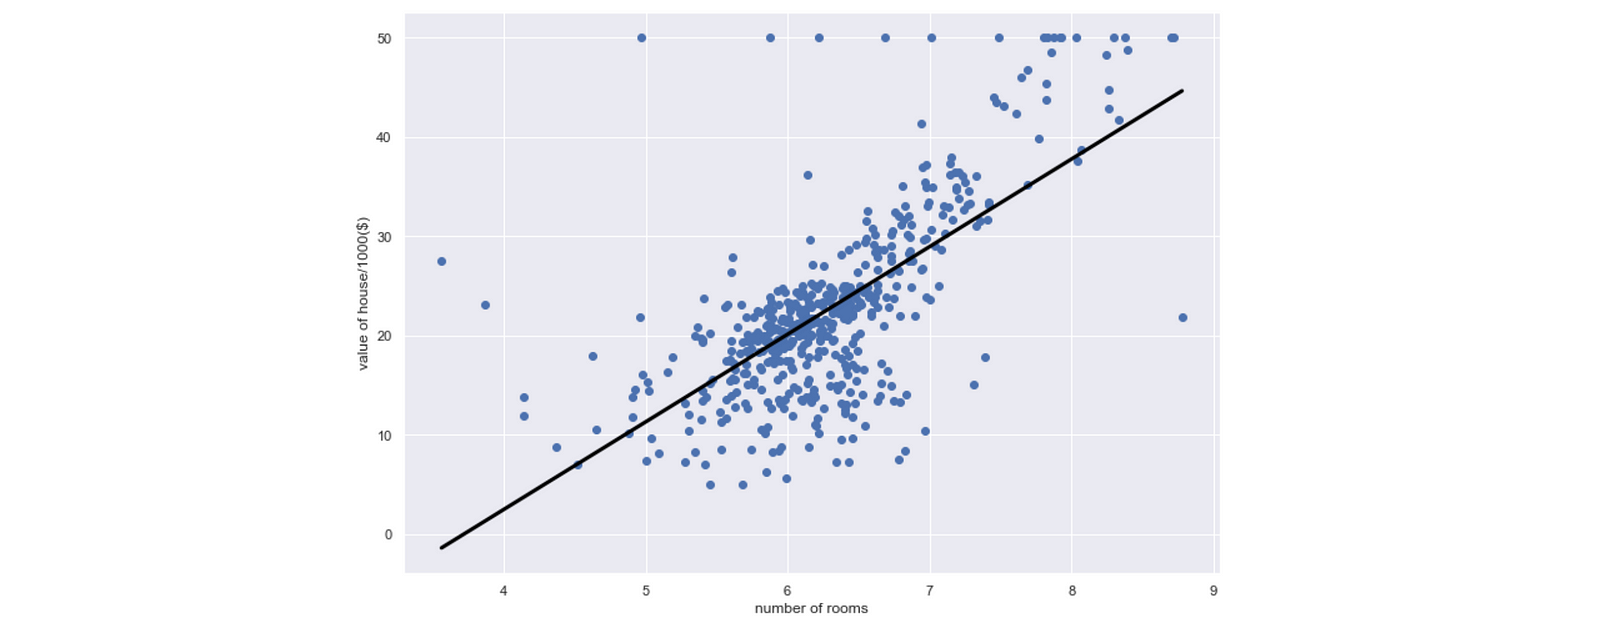 Boston house price using linear regression example